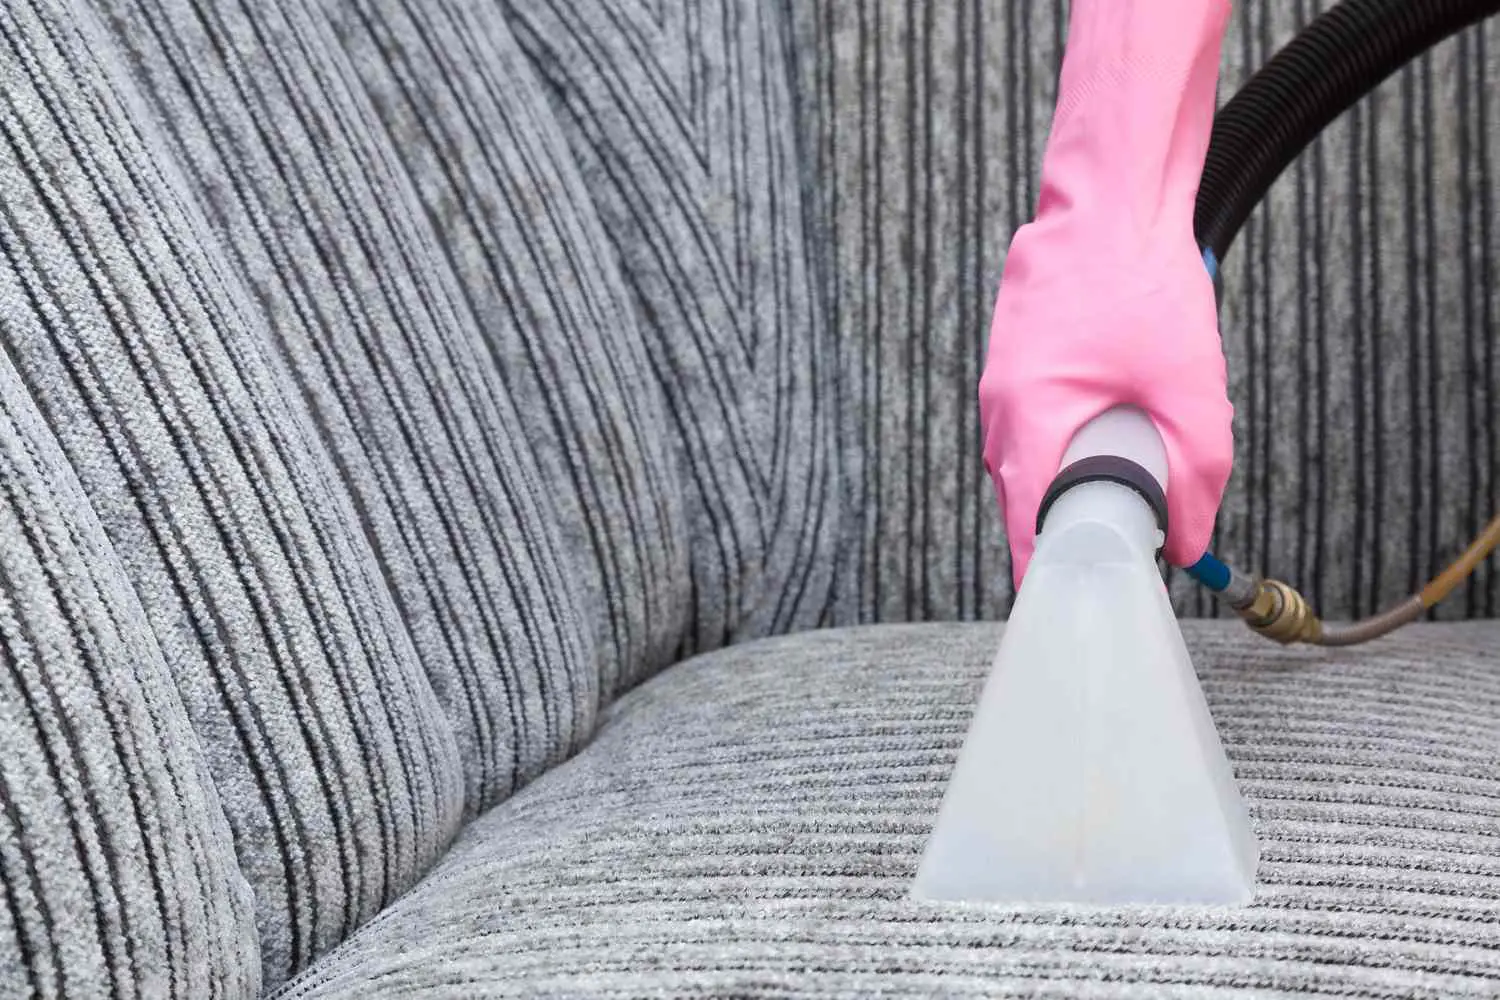 Cleaning your upholstery